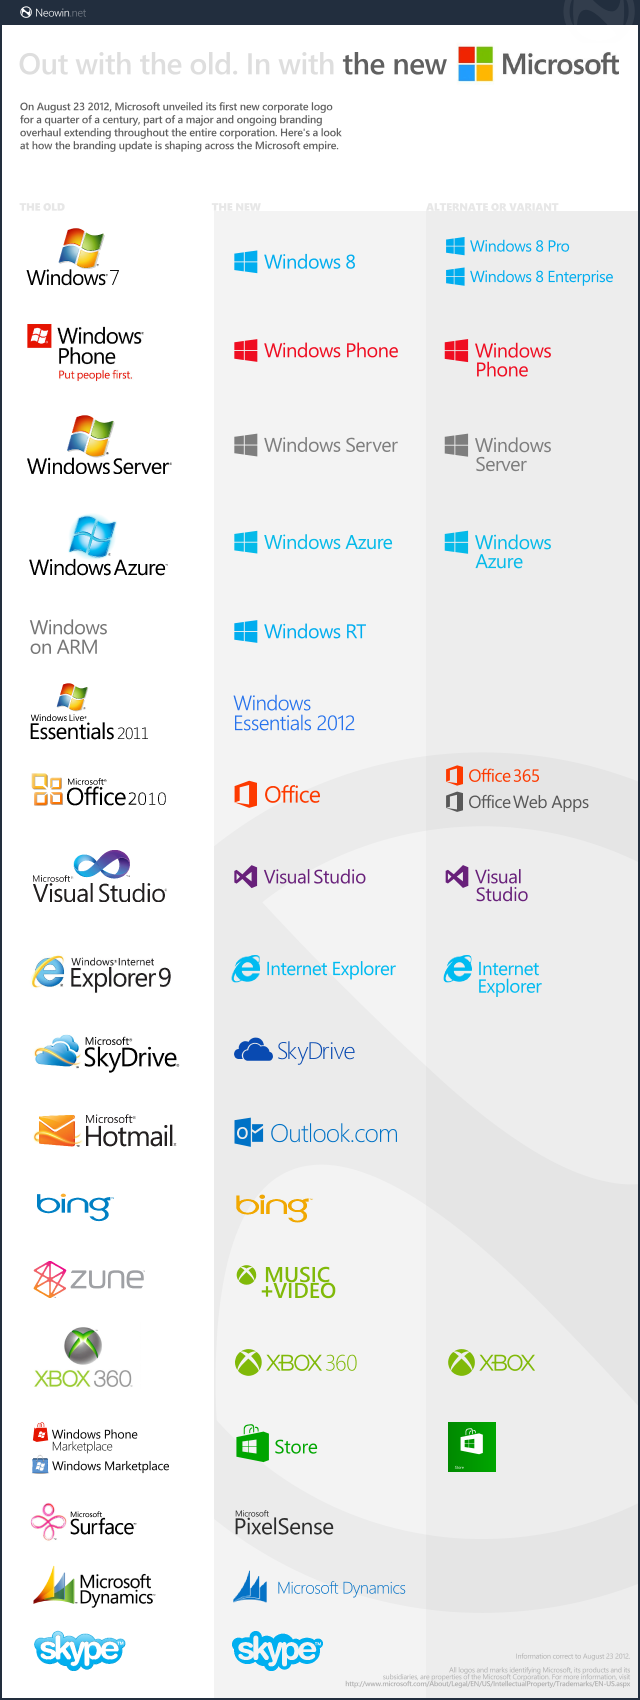 microsoft-brand-family-2012-4.png